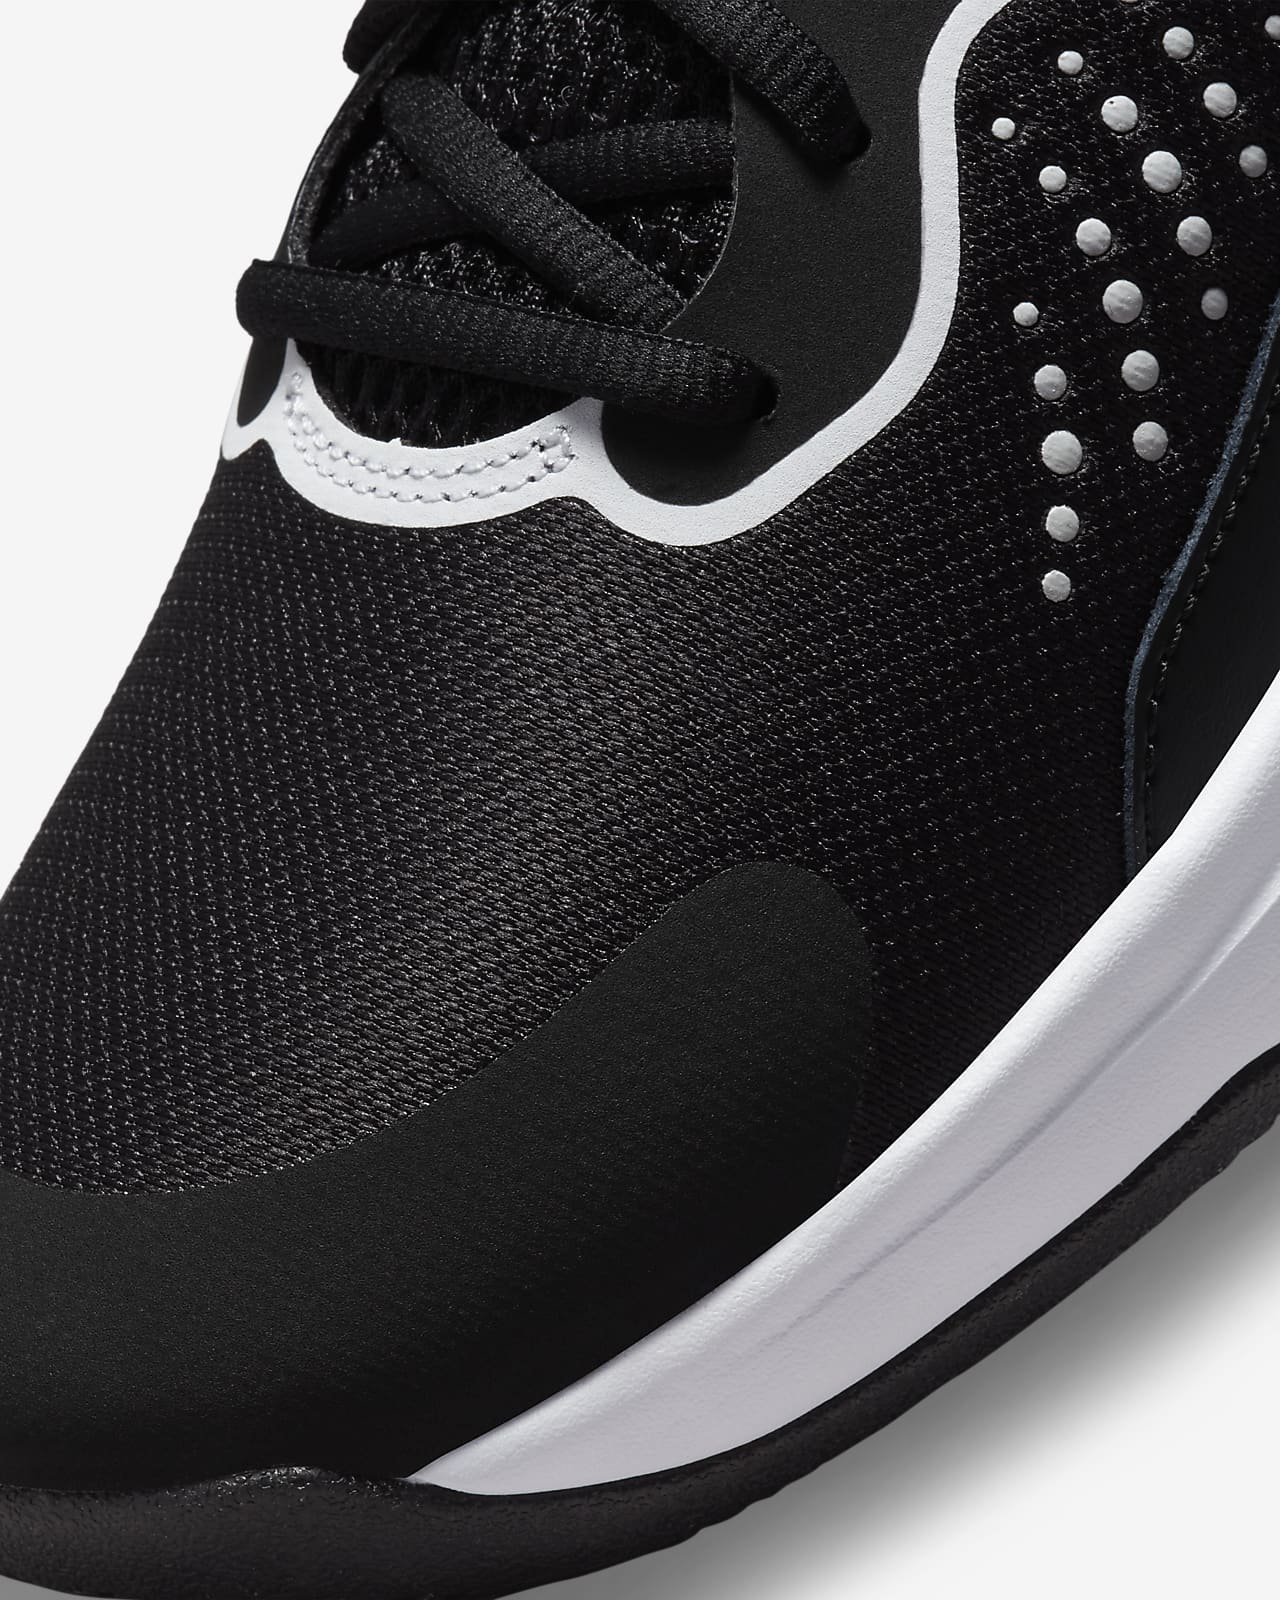 NIKE FLY.BY MID 3 - BLACK/WHITE